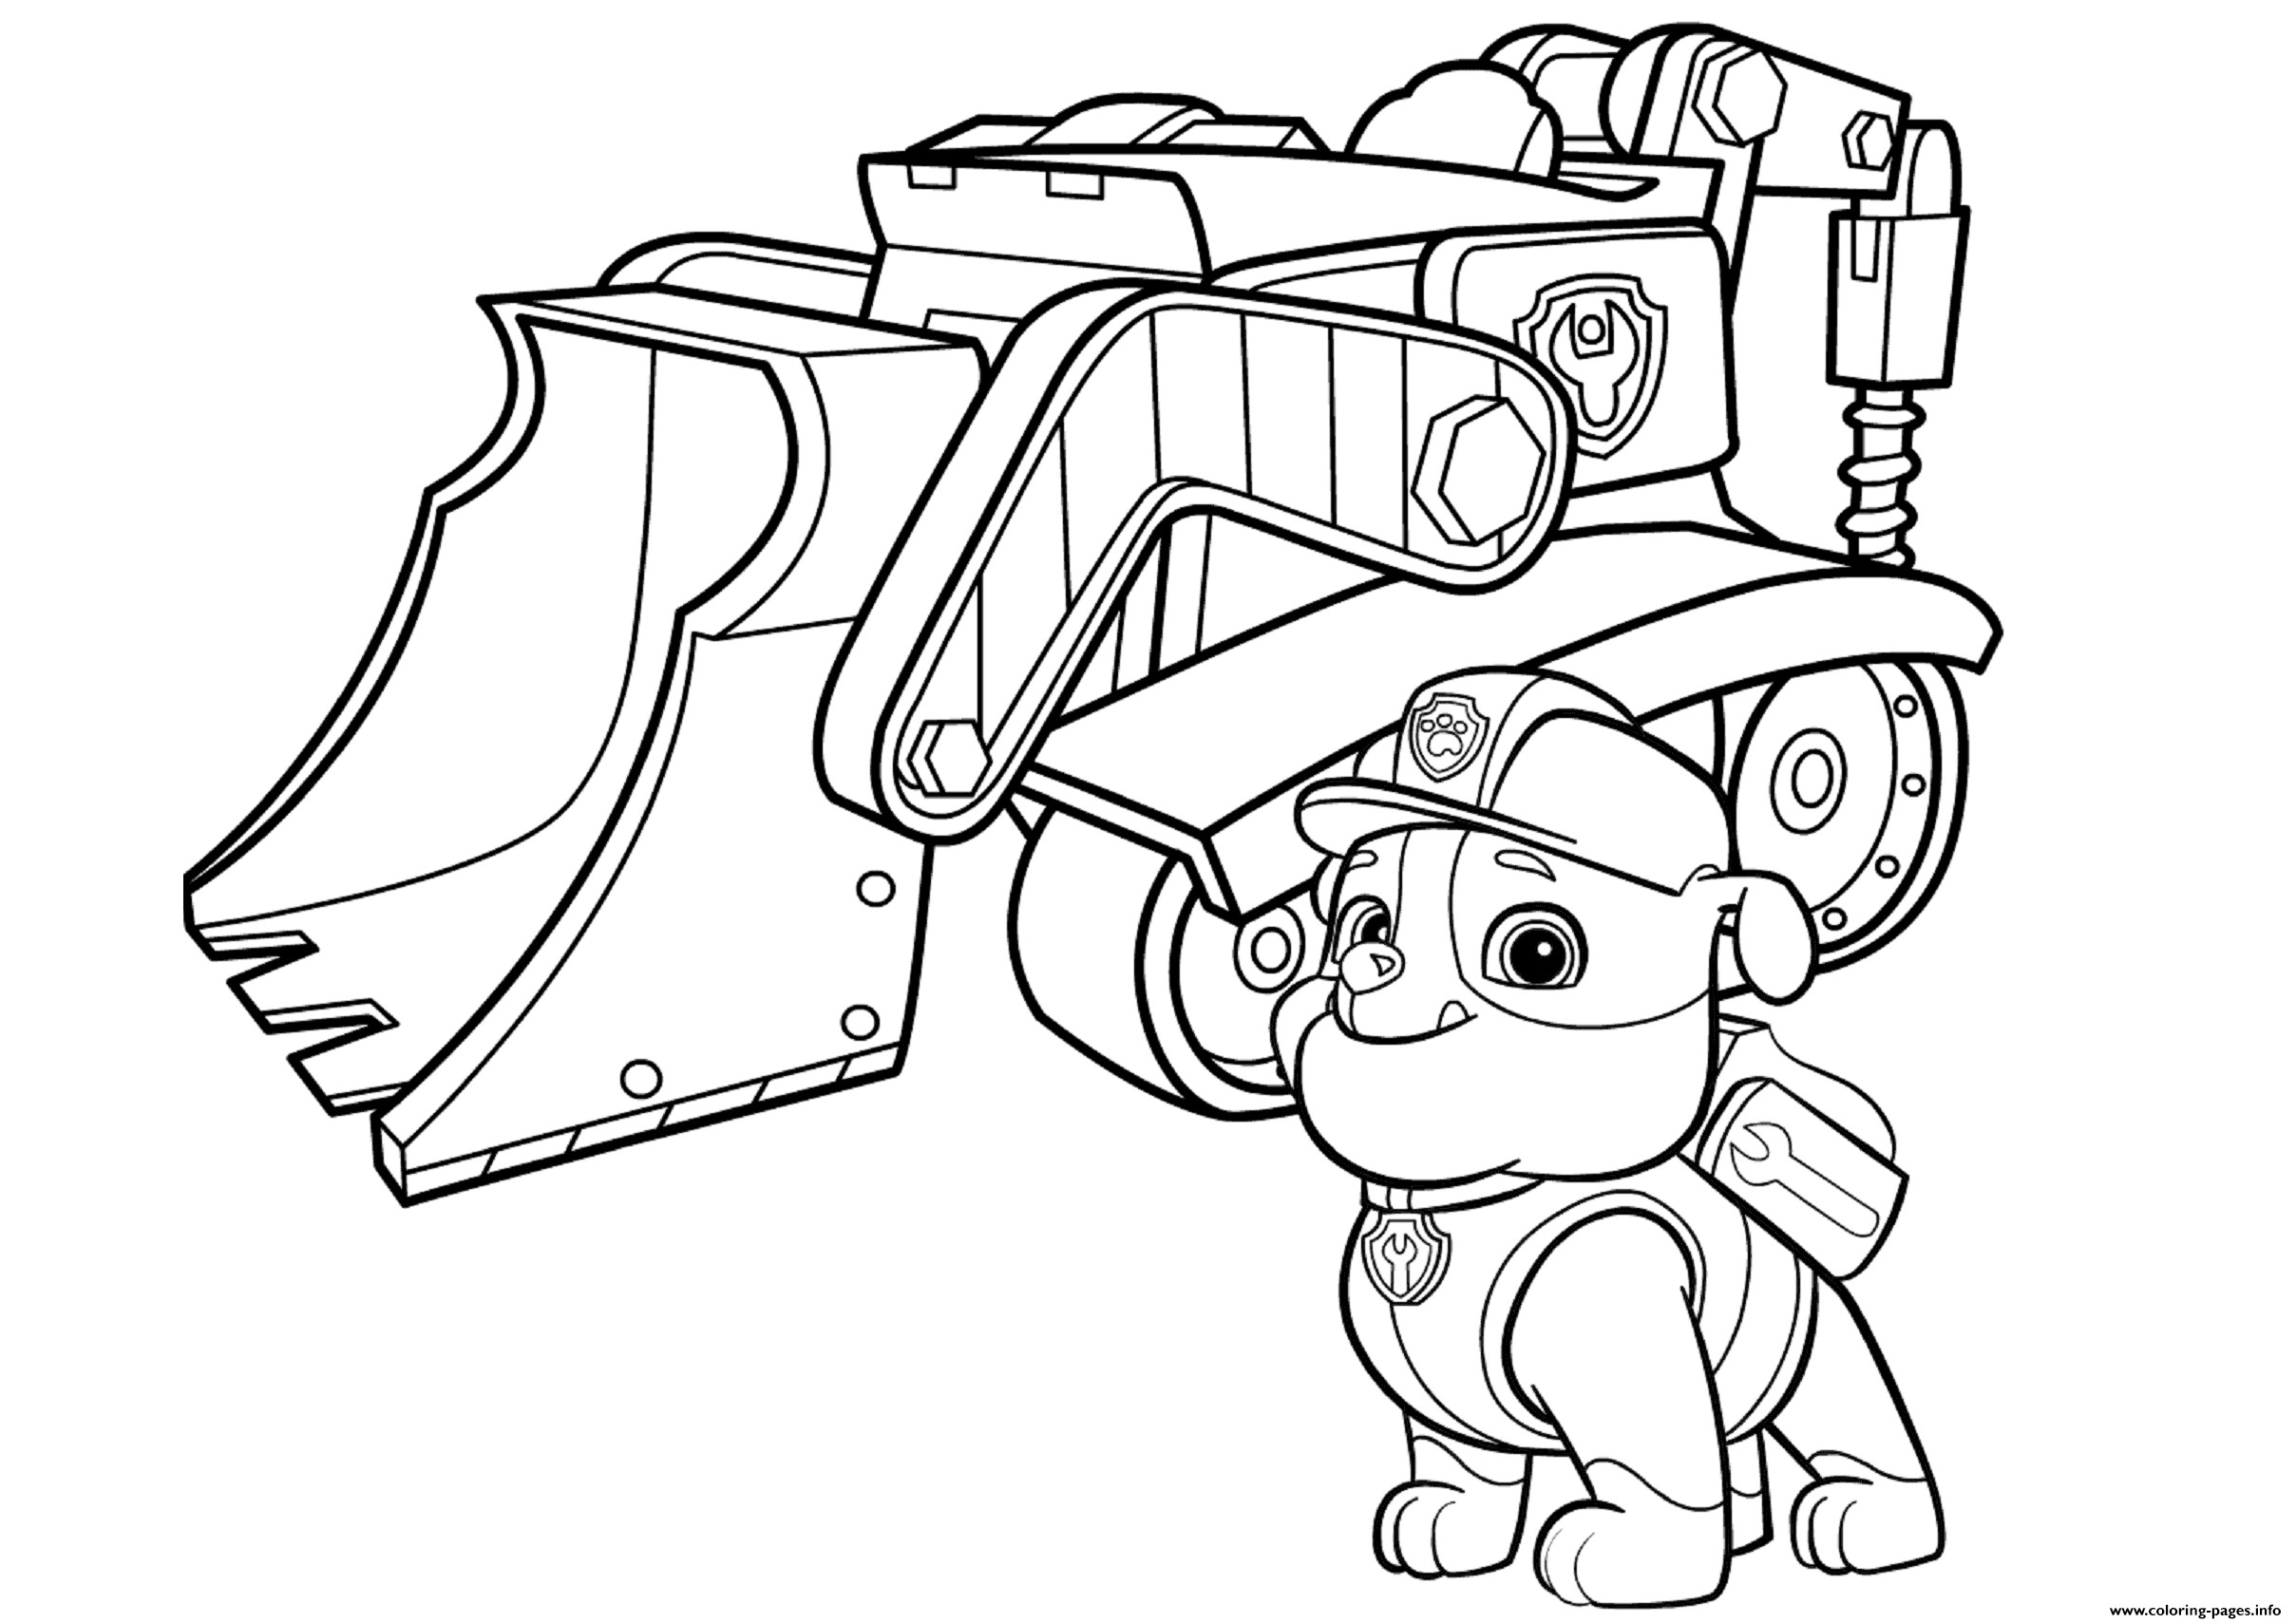 Paw Patrol Printable Coloring Pages
 FREE PAW Patrol Coloring Pages Happiness is Homemade